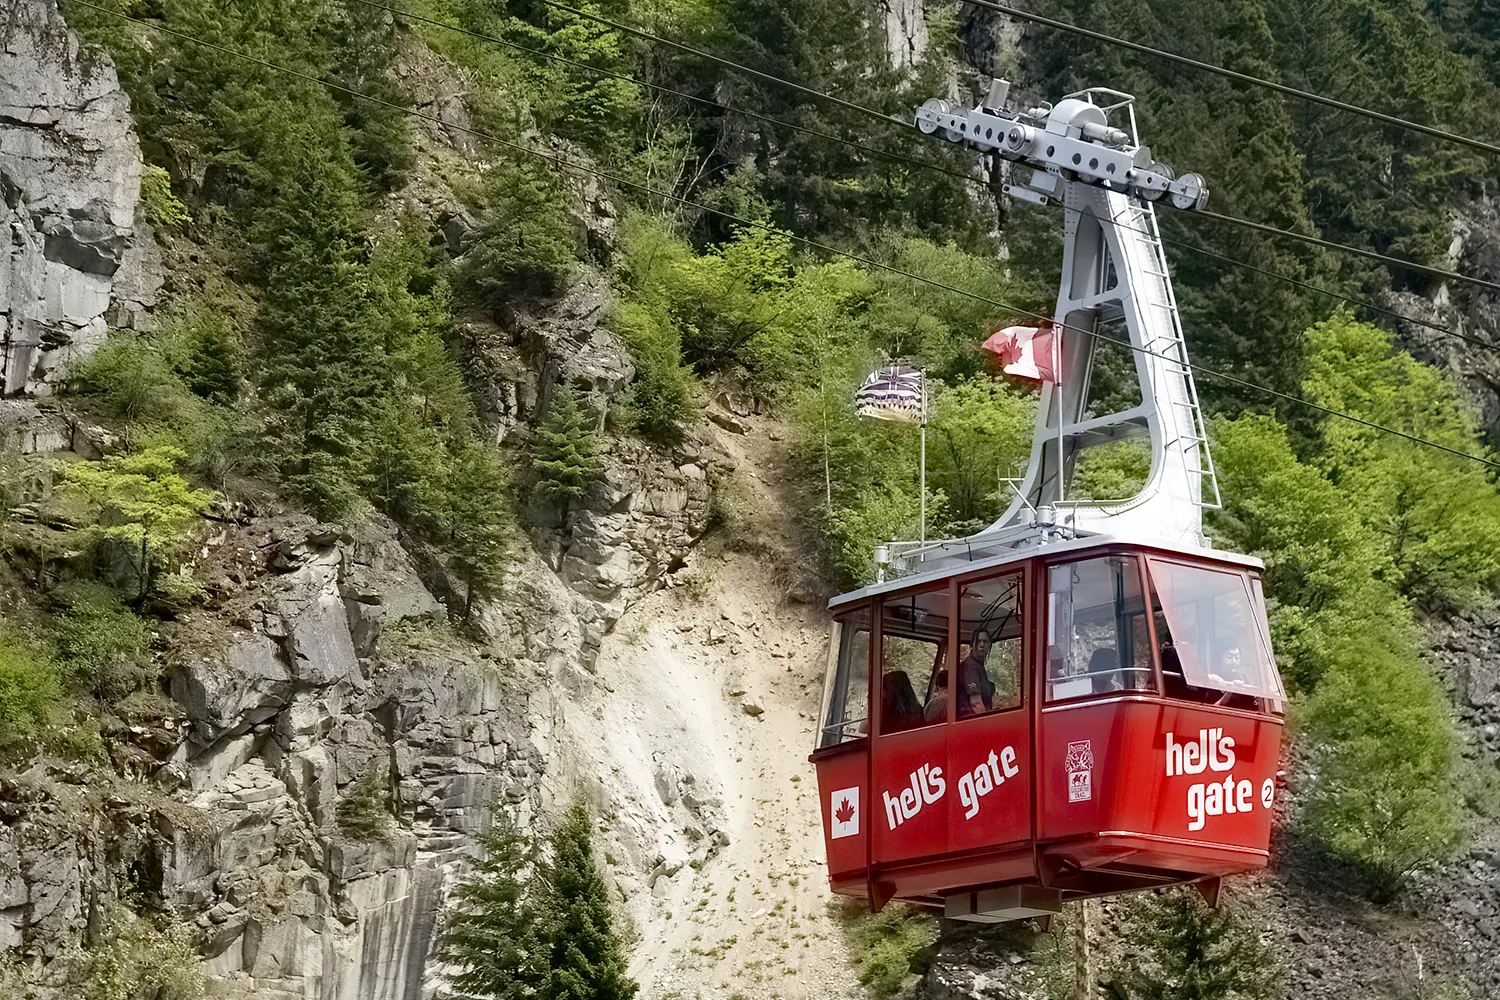 Hell's Gate Airtram tourist attraction in British Columbia Canada near the town of Boston Bar